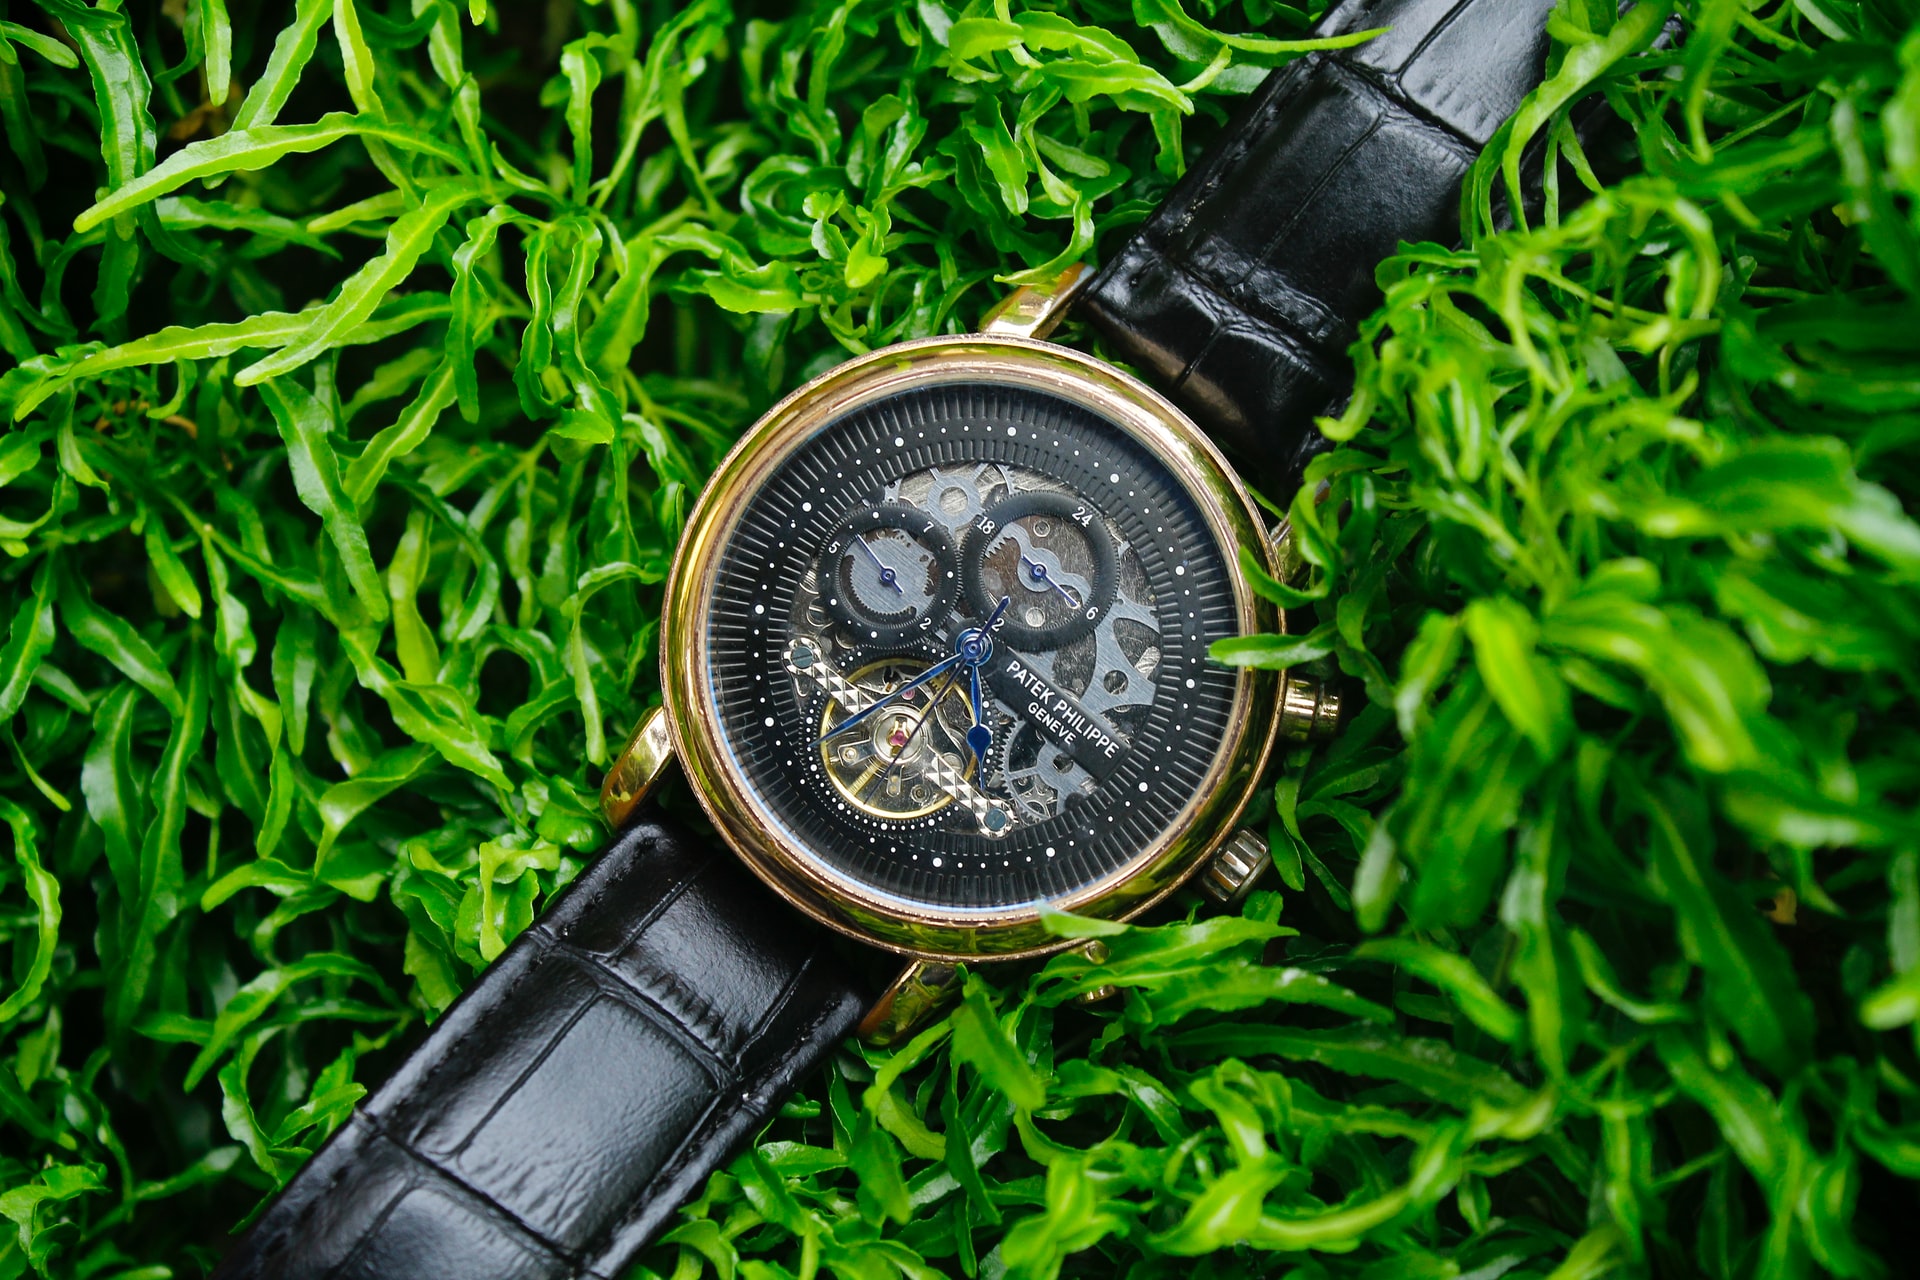 5 things and facts you did not know about Patek Phillipe watches